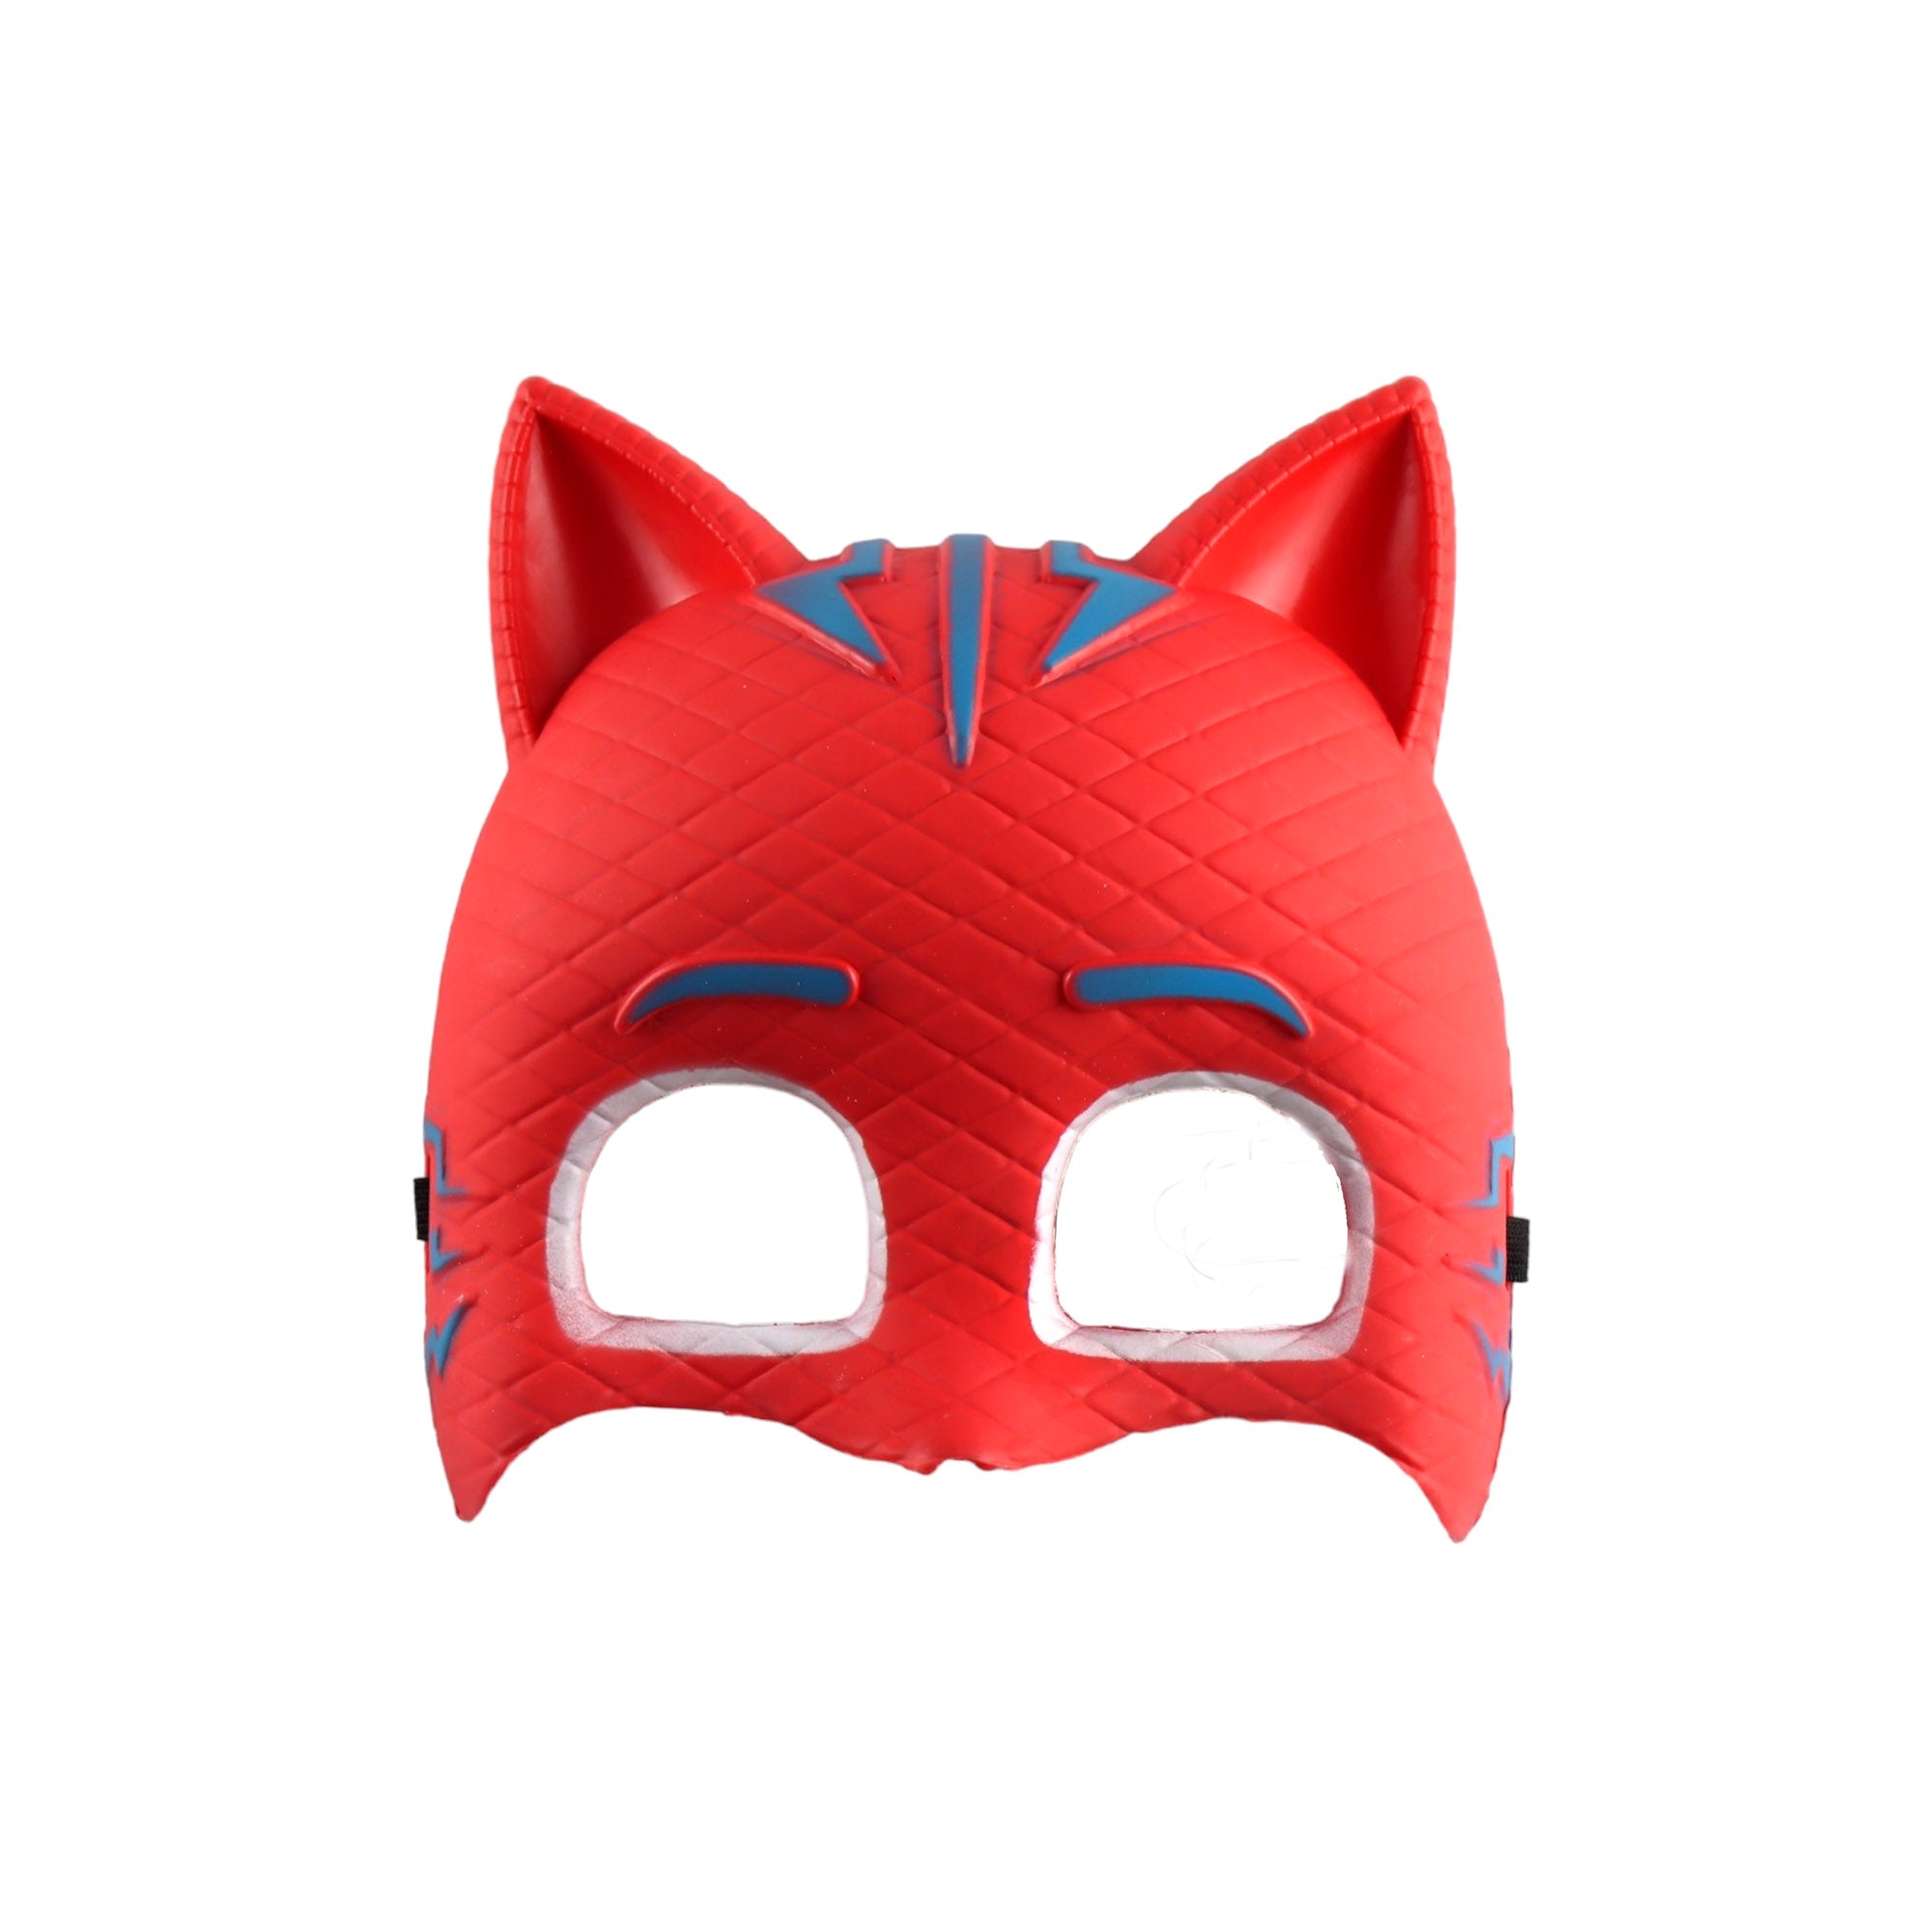 Kids Party Mask